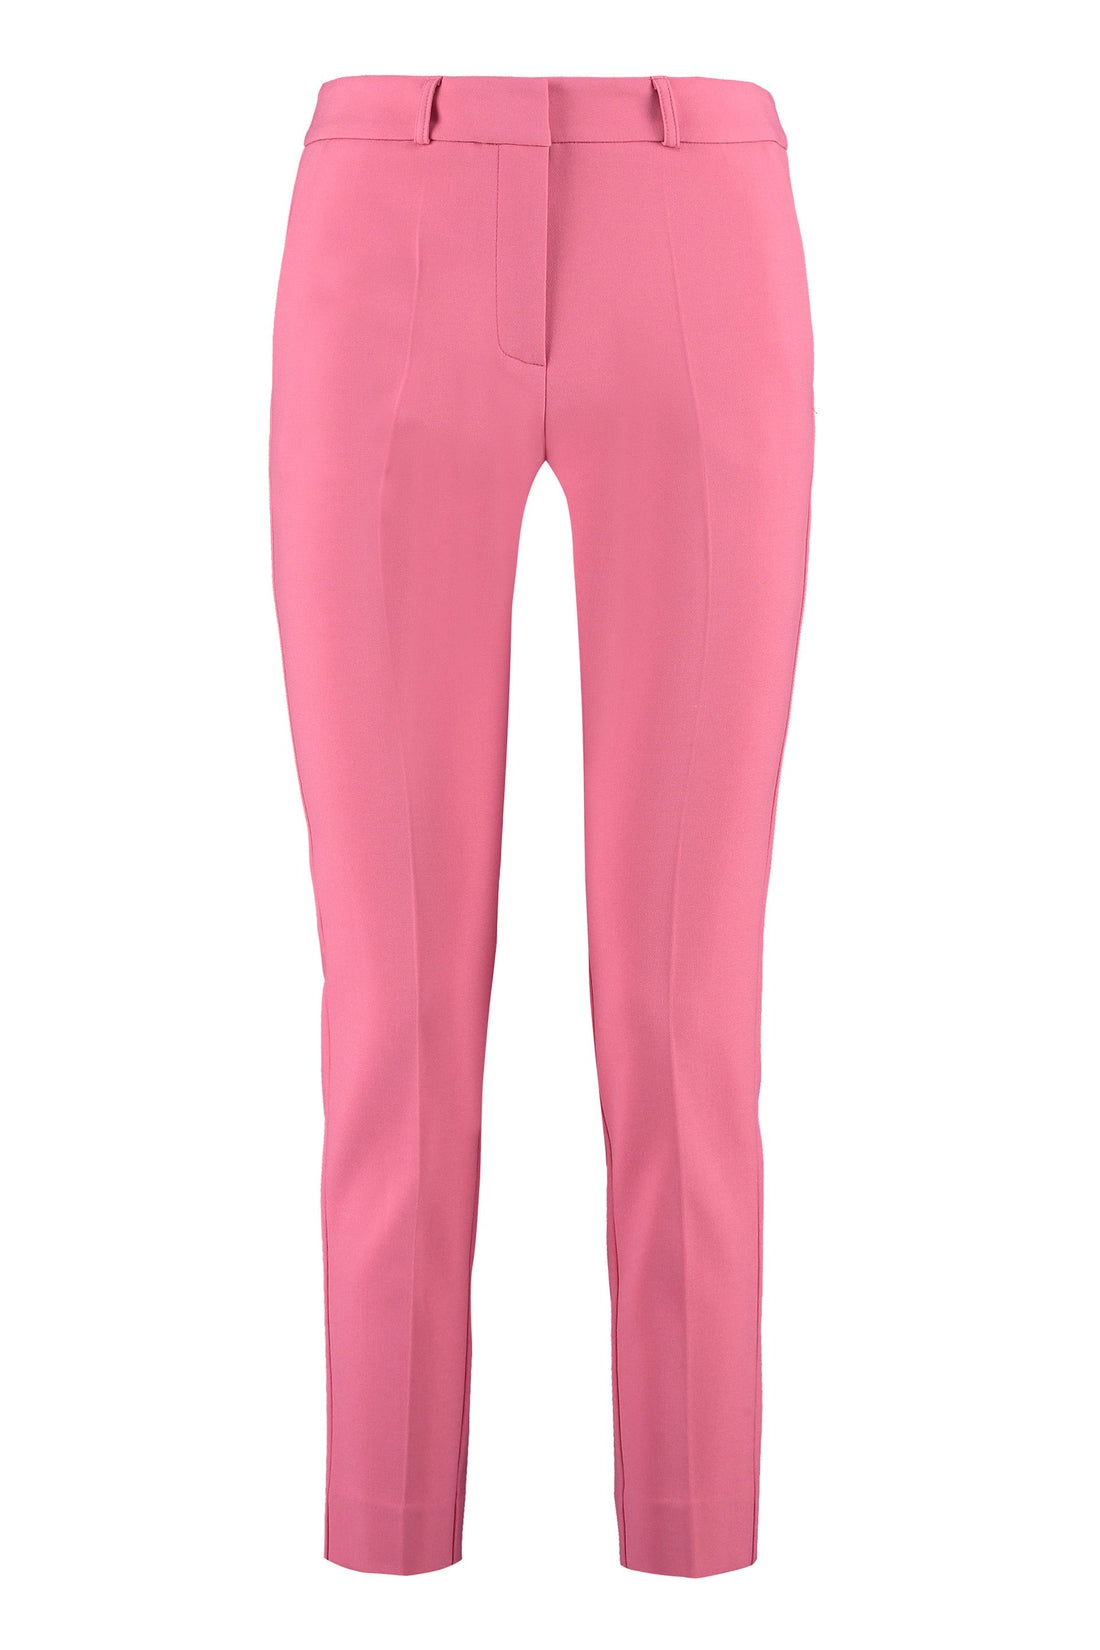 Simona Corsellini-OUTLET-SALE-Crepe pants with straight legs-ARCHIVIST